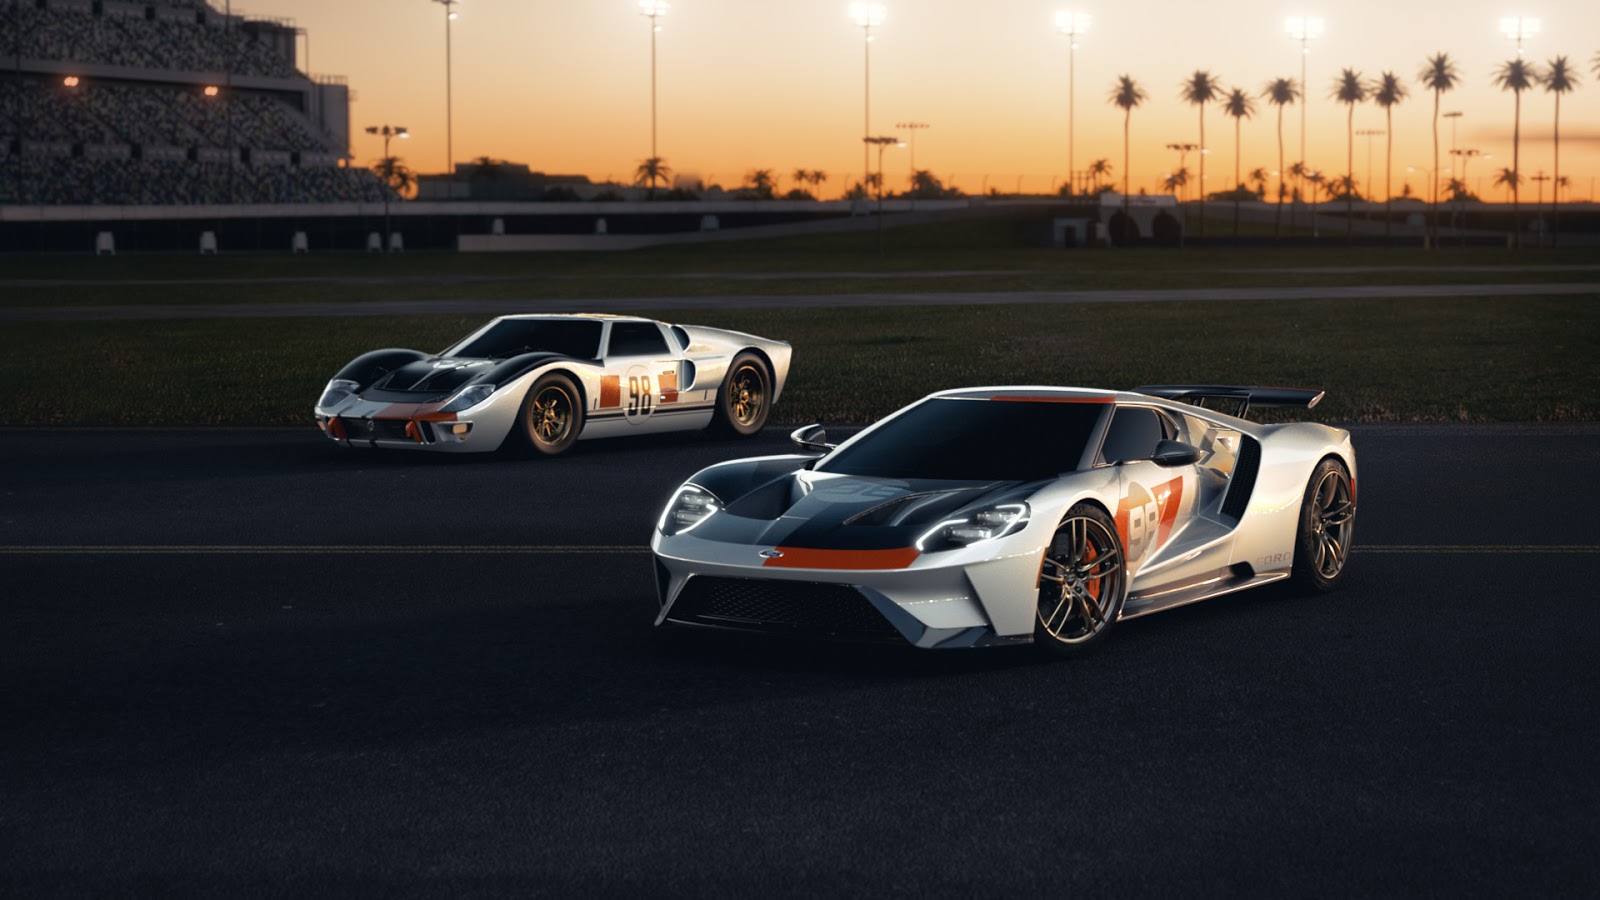 2021 Ford GT Heritage Edition 09 Η πρώτη έκδοση Heritage Edition του Ford GT και η μοναδική έκδοση, Studio Collection